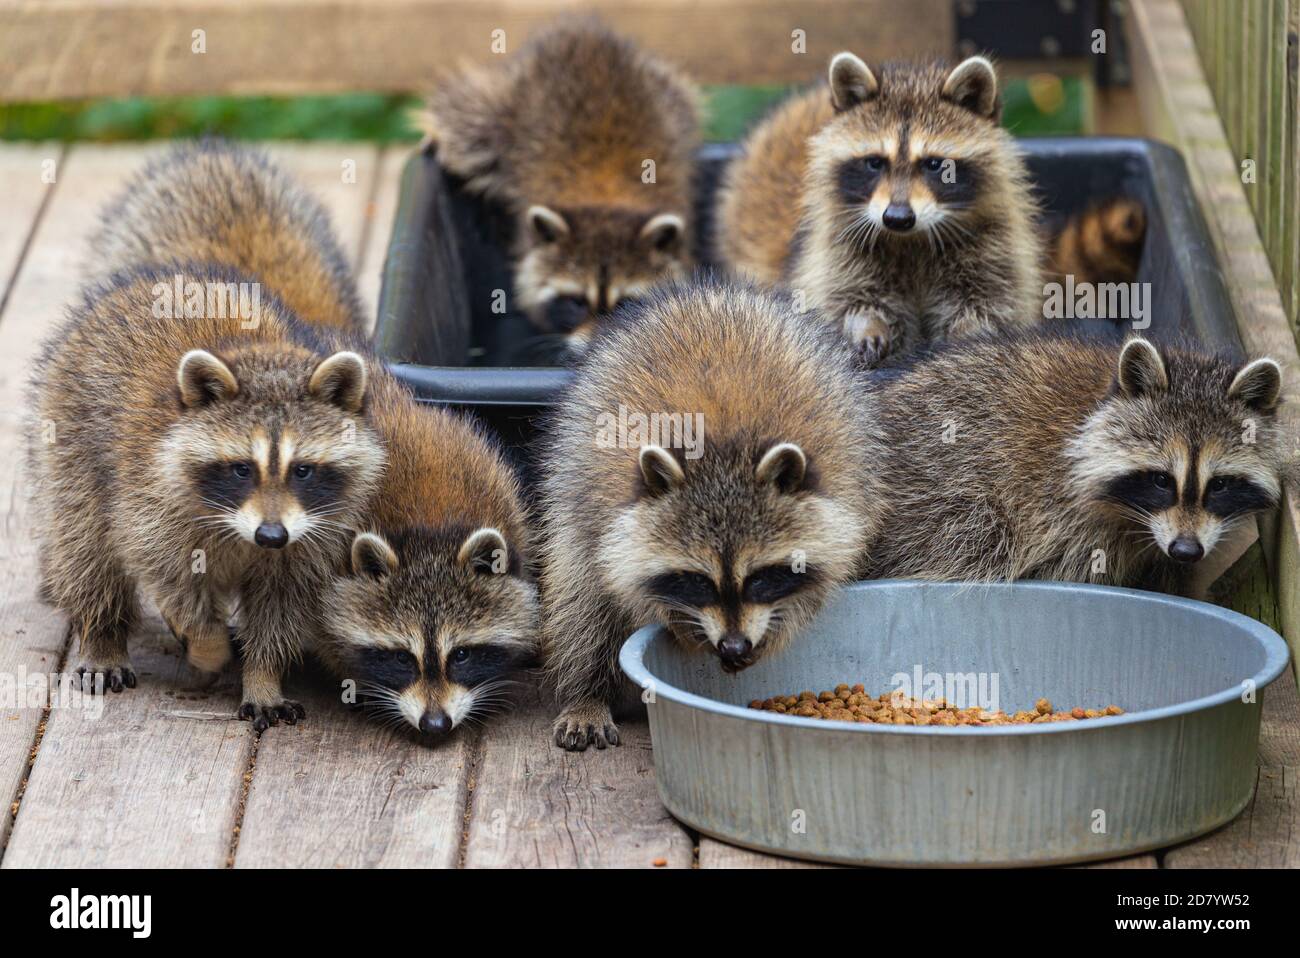 Seven raccoons eating and drinking from food bowls on a rustic wooden deck. Stock Photo